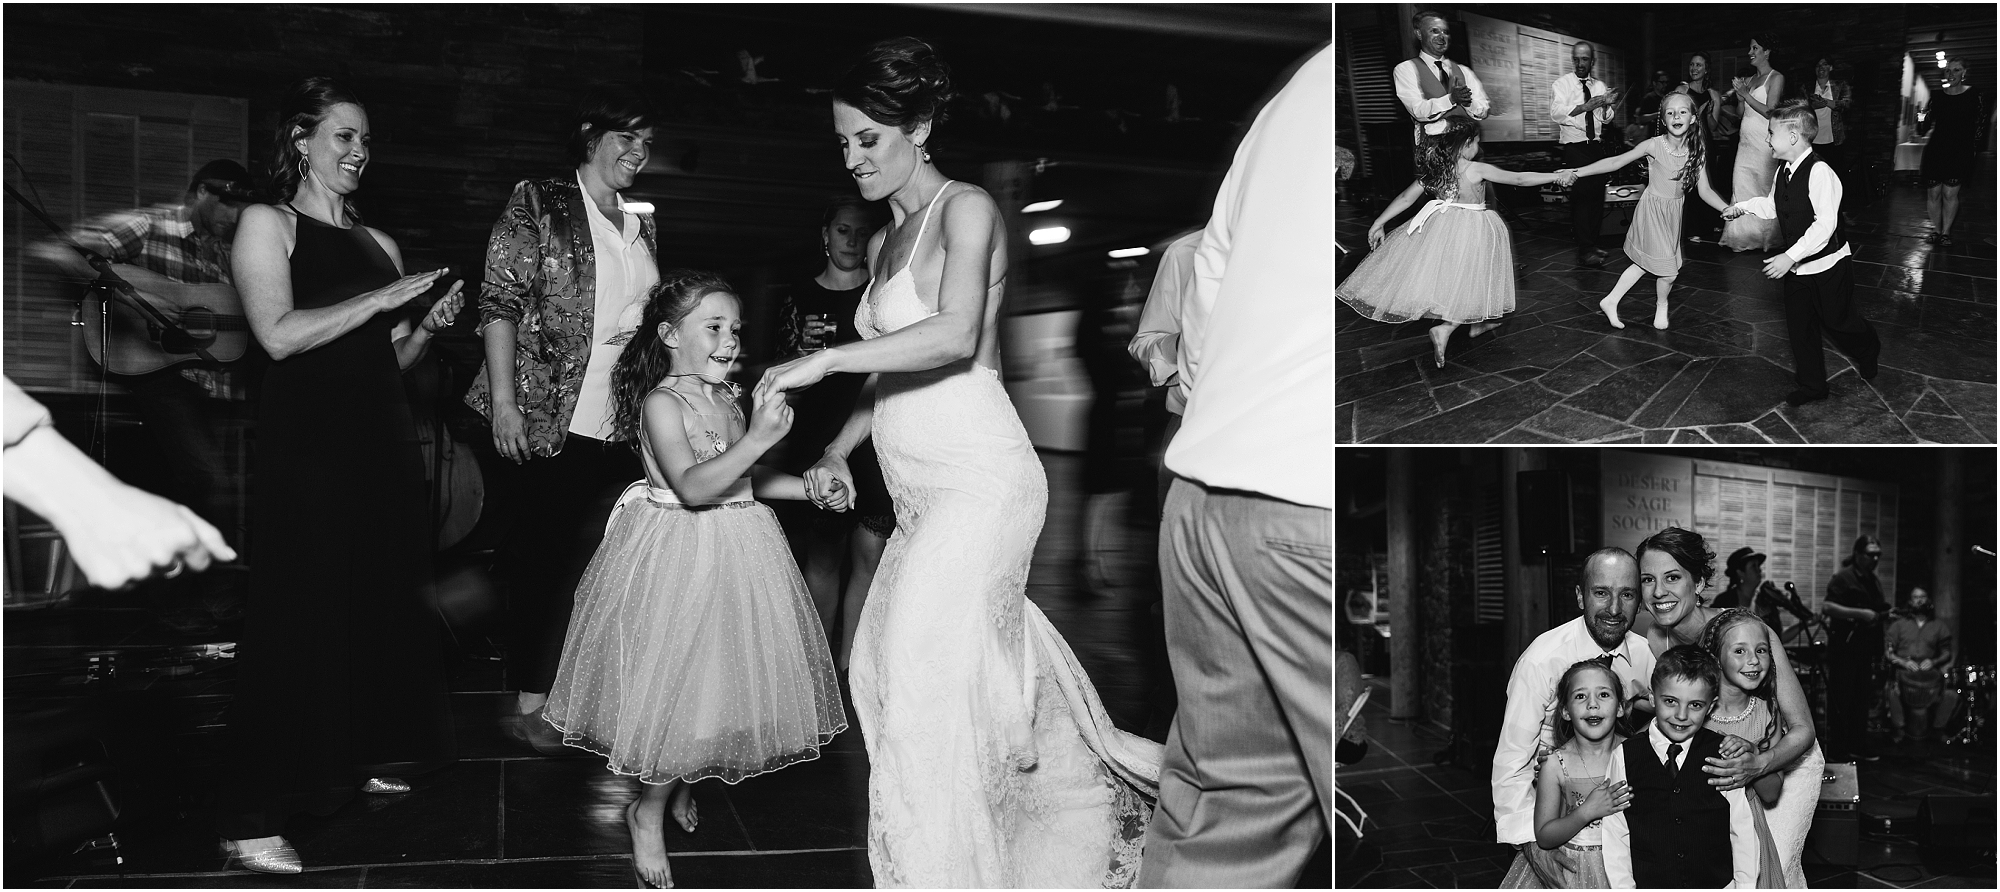 The bride and groom dance with the youngest members of the wedding party at their High Desert Museum homestead wedding in Bend, OR. | Erica Swantek Photography